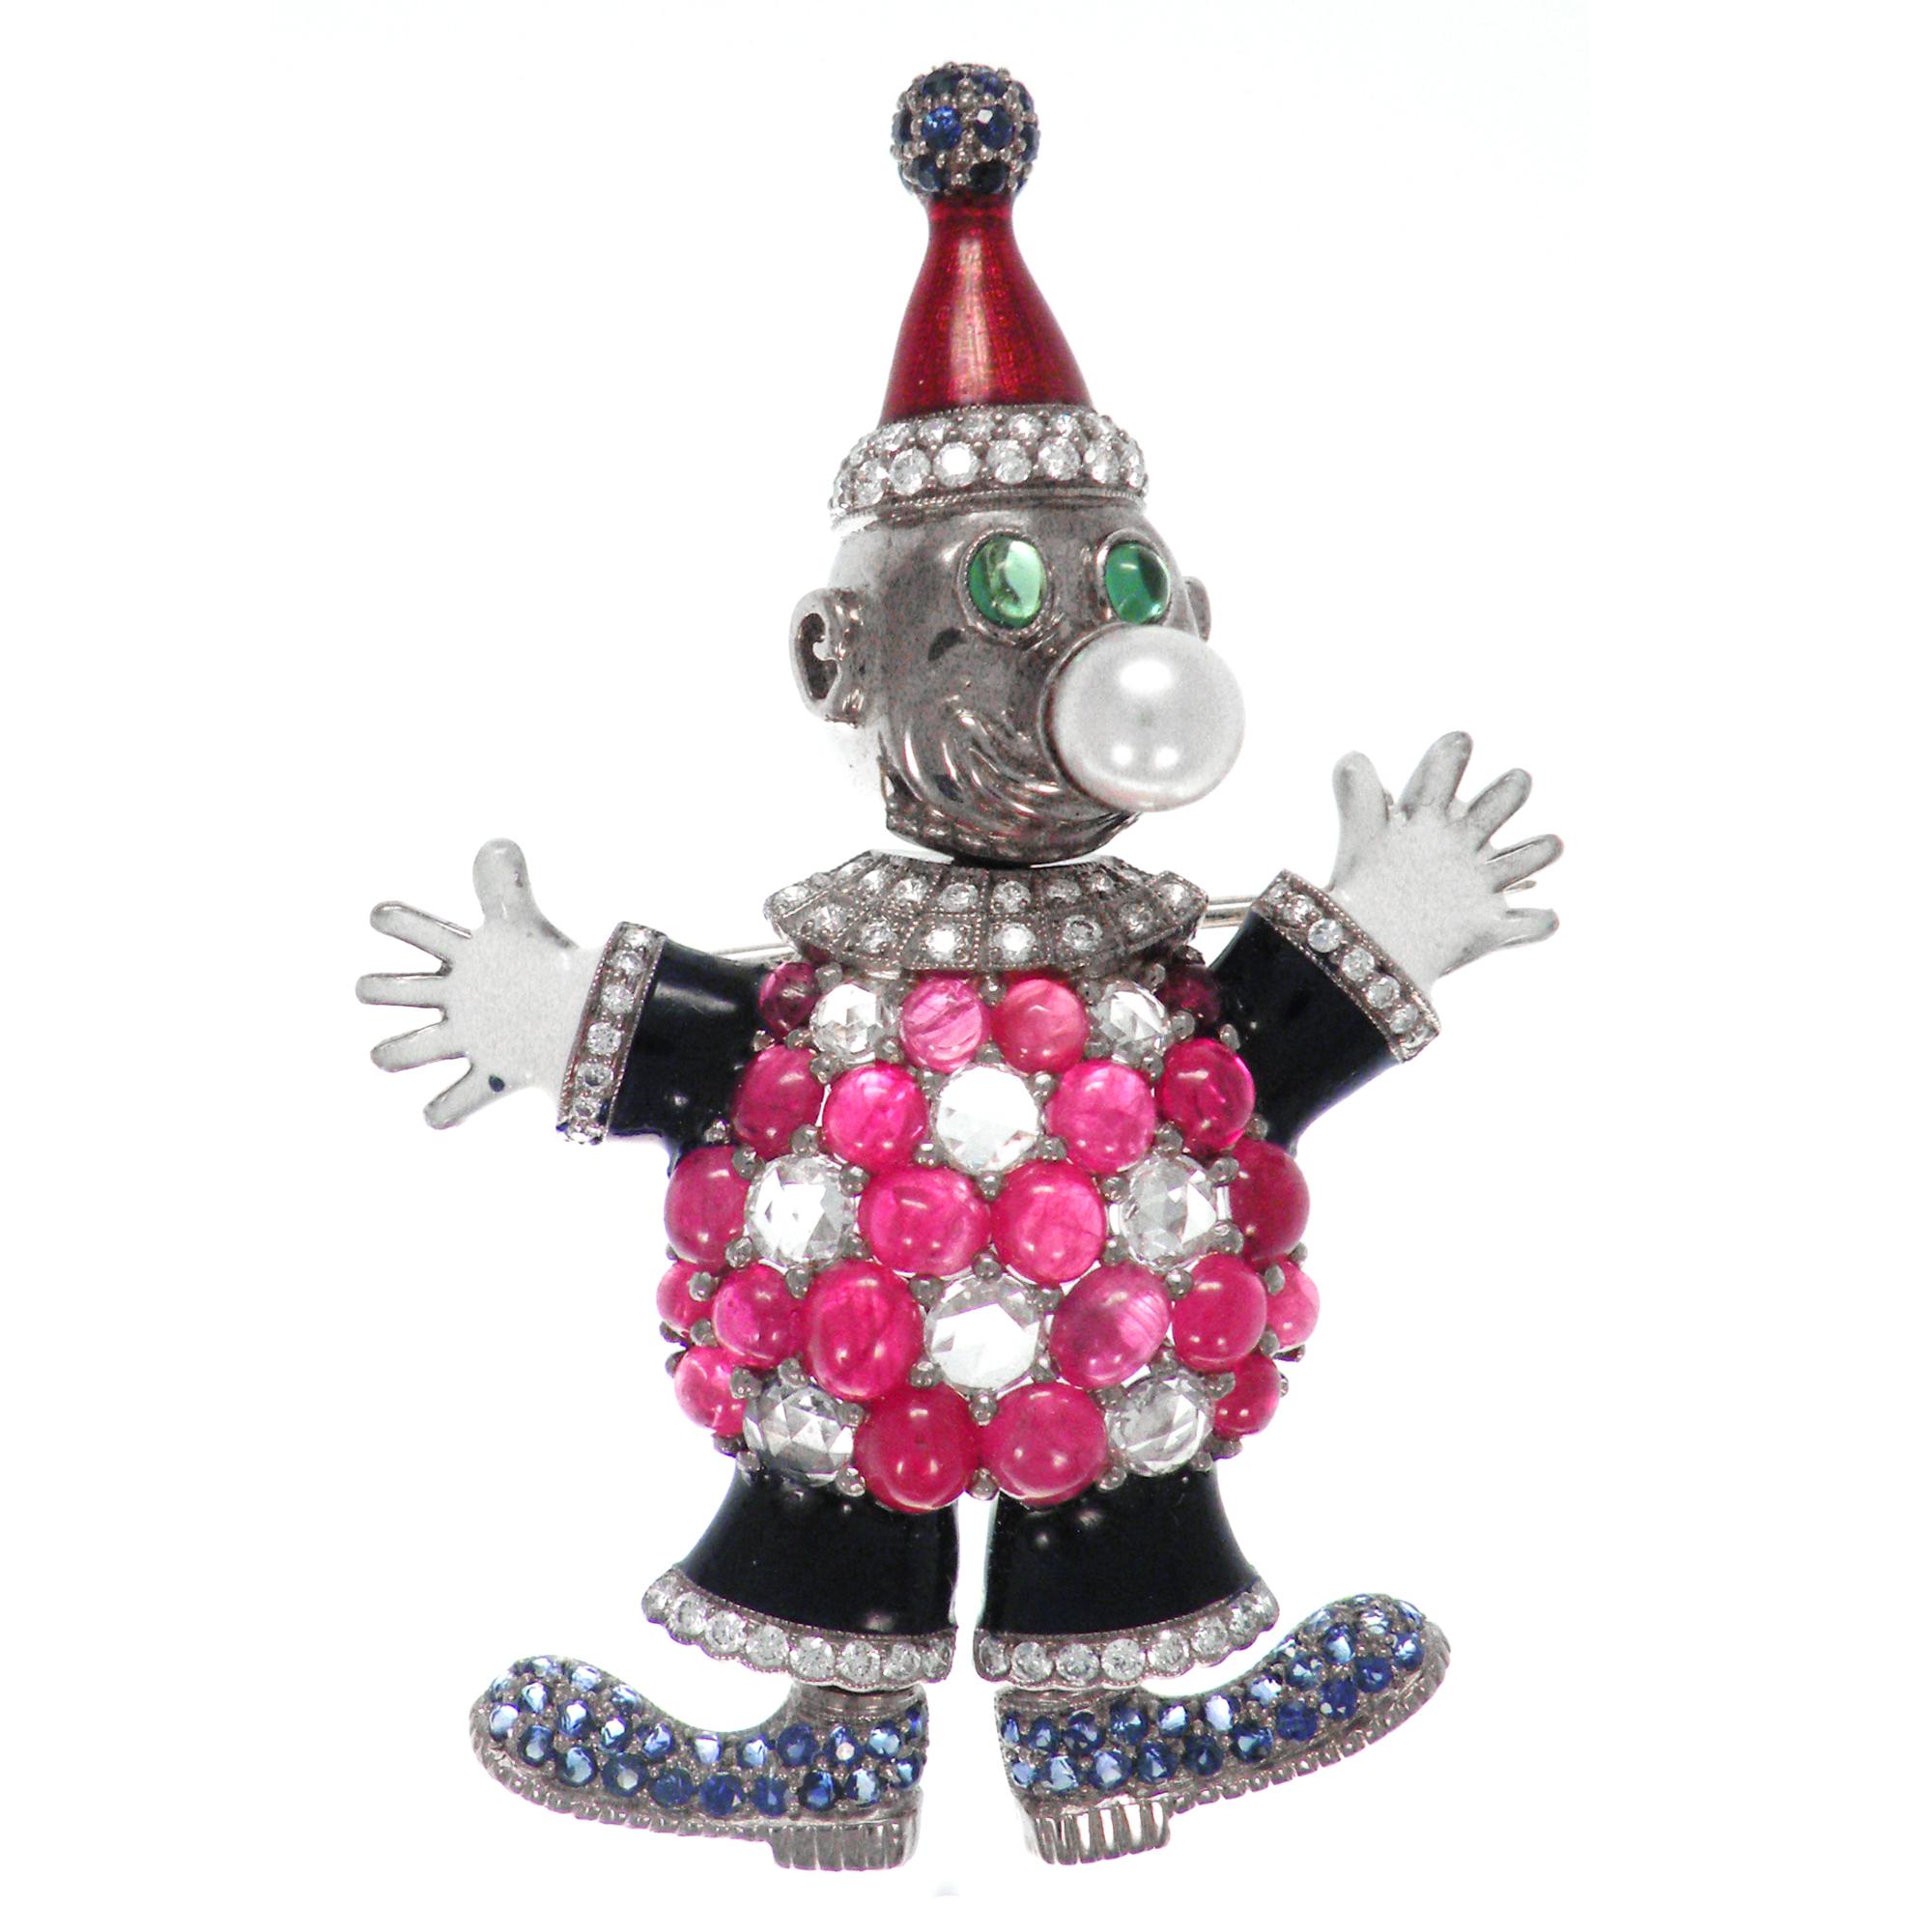 Out of all happiness faces, this clown has the most happiest face among our collection.
He brings everyone a smiley face by turning side to side and sharing his smile.
His nose sets with a pearl, while his red and white apparel sets with 22